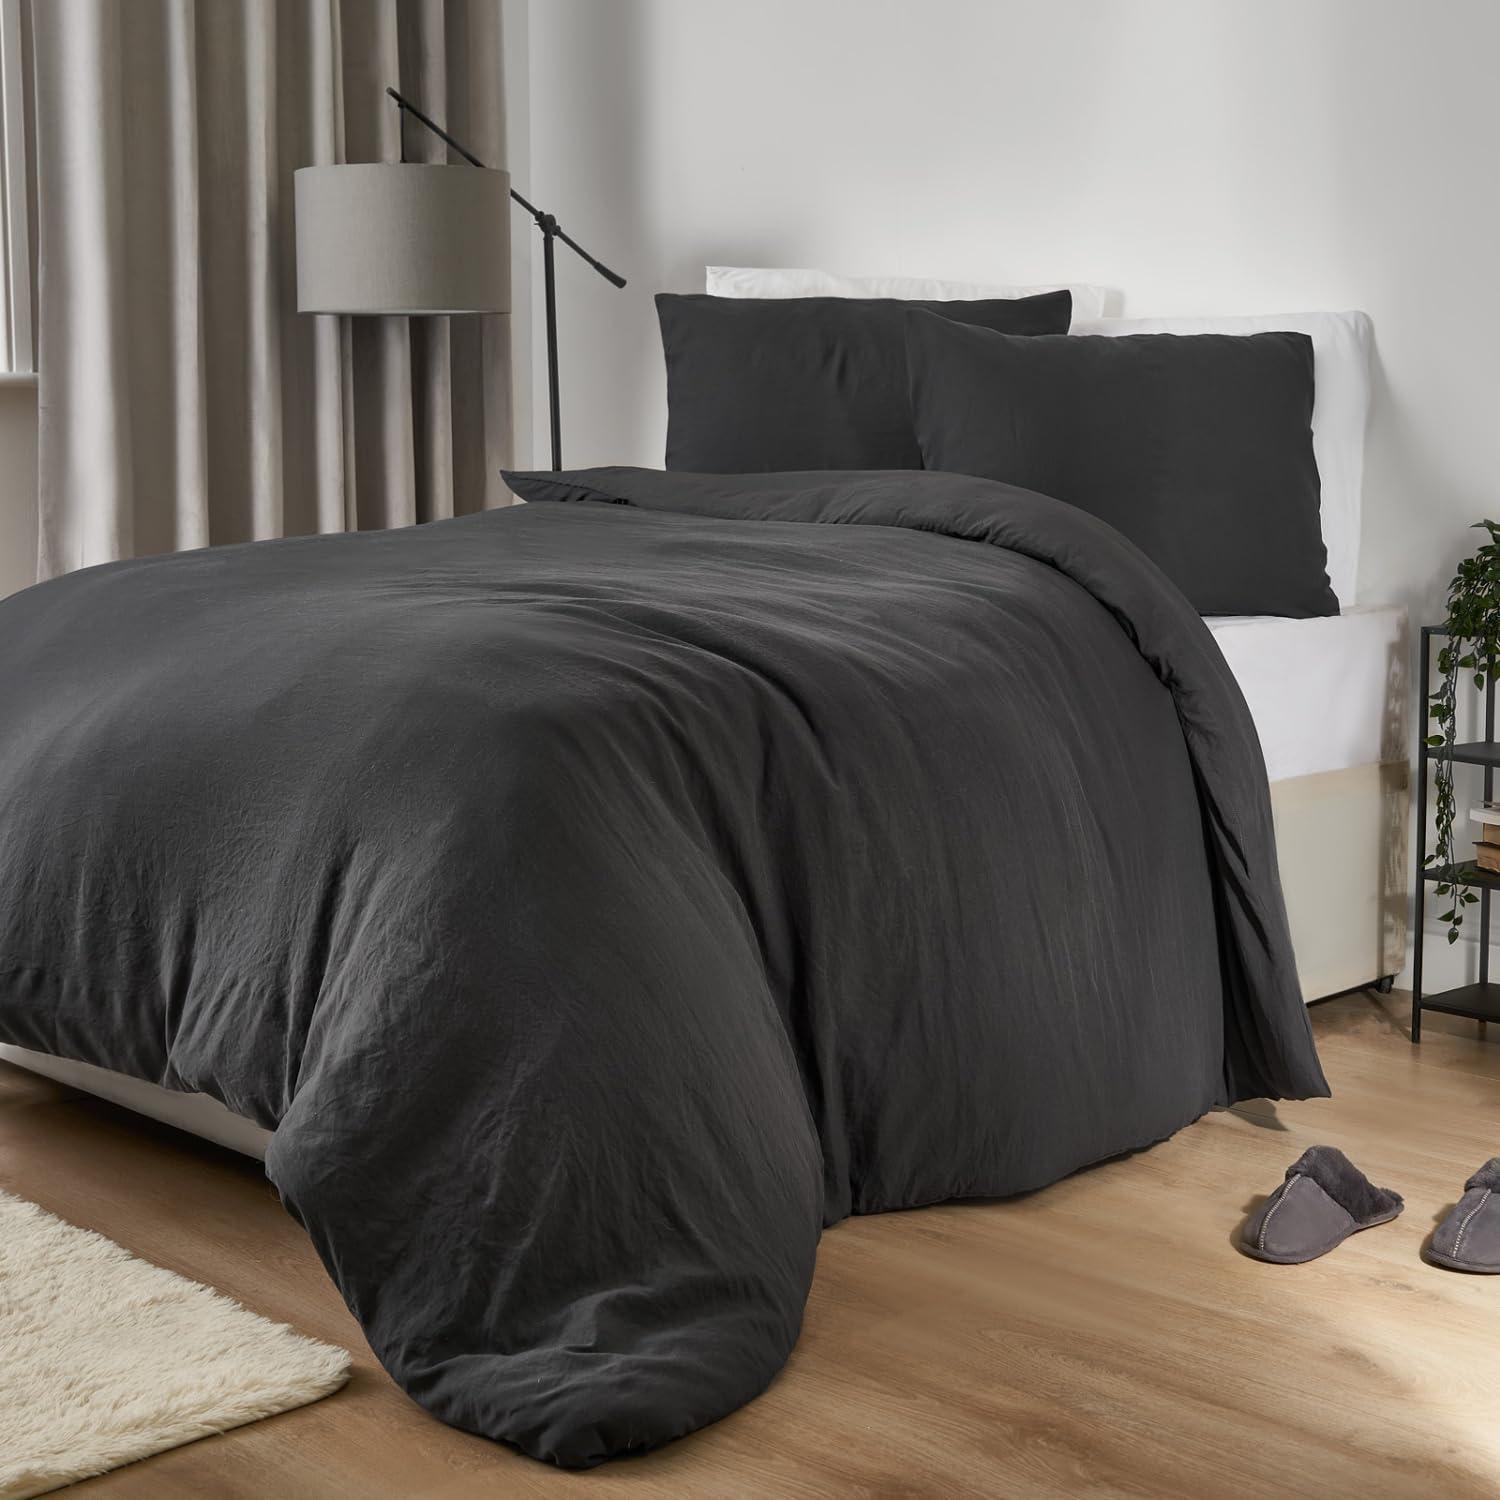 Washed Linen King Duvet Cover with 2 Pillow Cases Super Soft Brushed Microfiber Linen Bedding Set King Size Duvet Cover 104 x90 Bed Duvet Cover King Internal Ties Charcoal Grey - Loomini